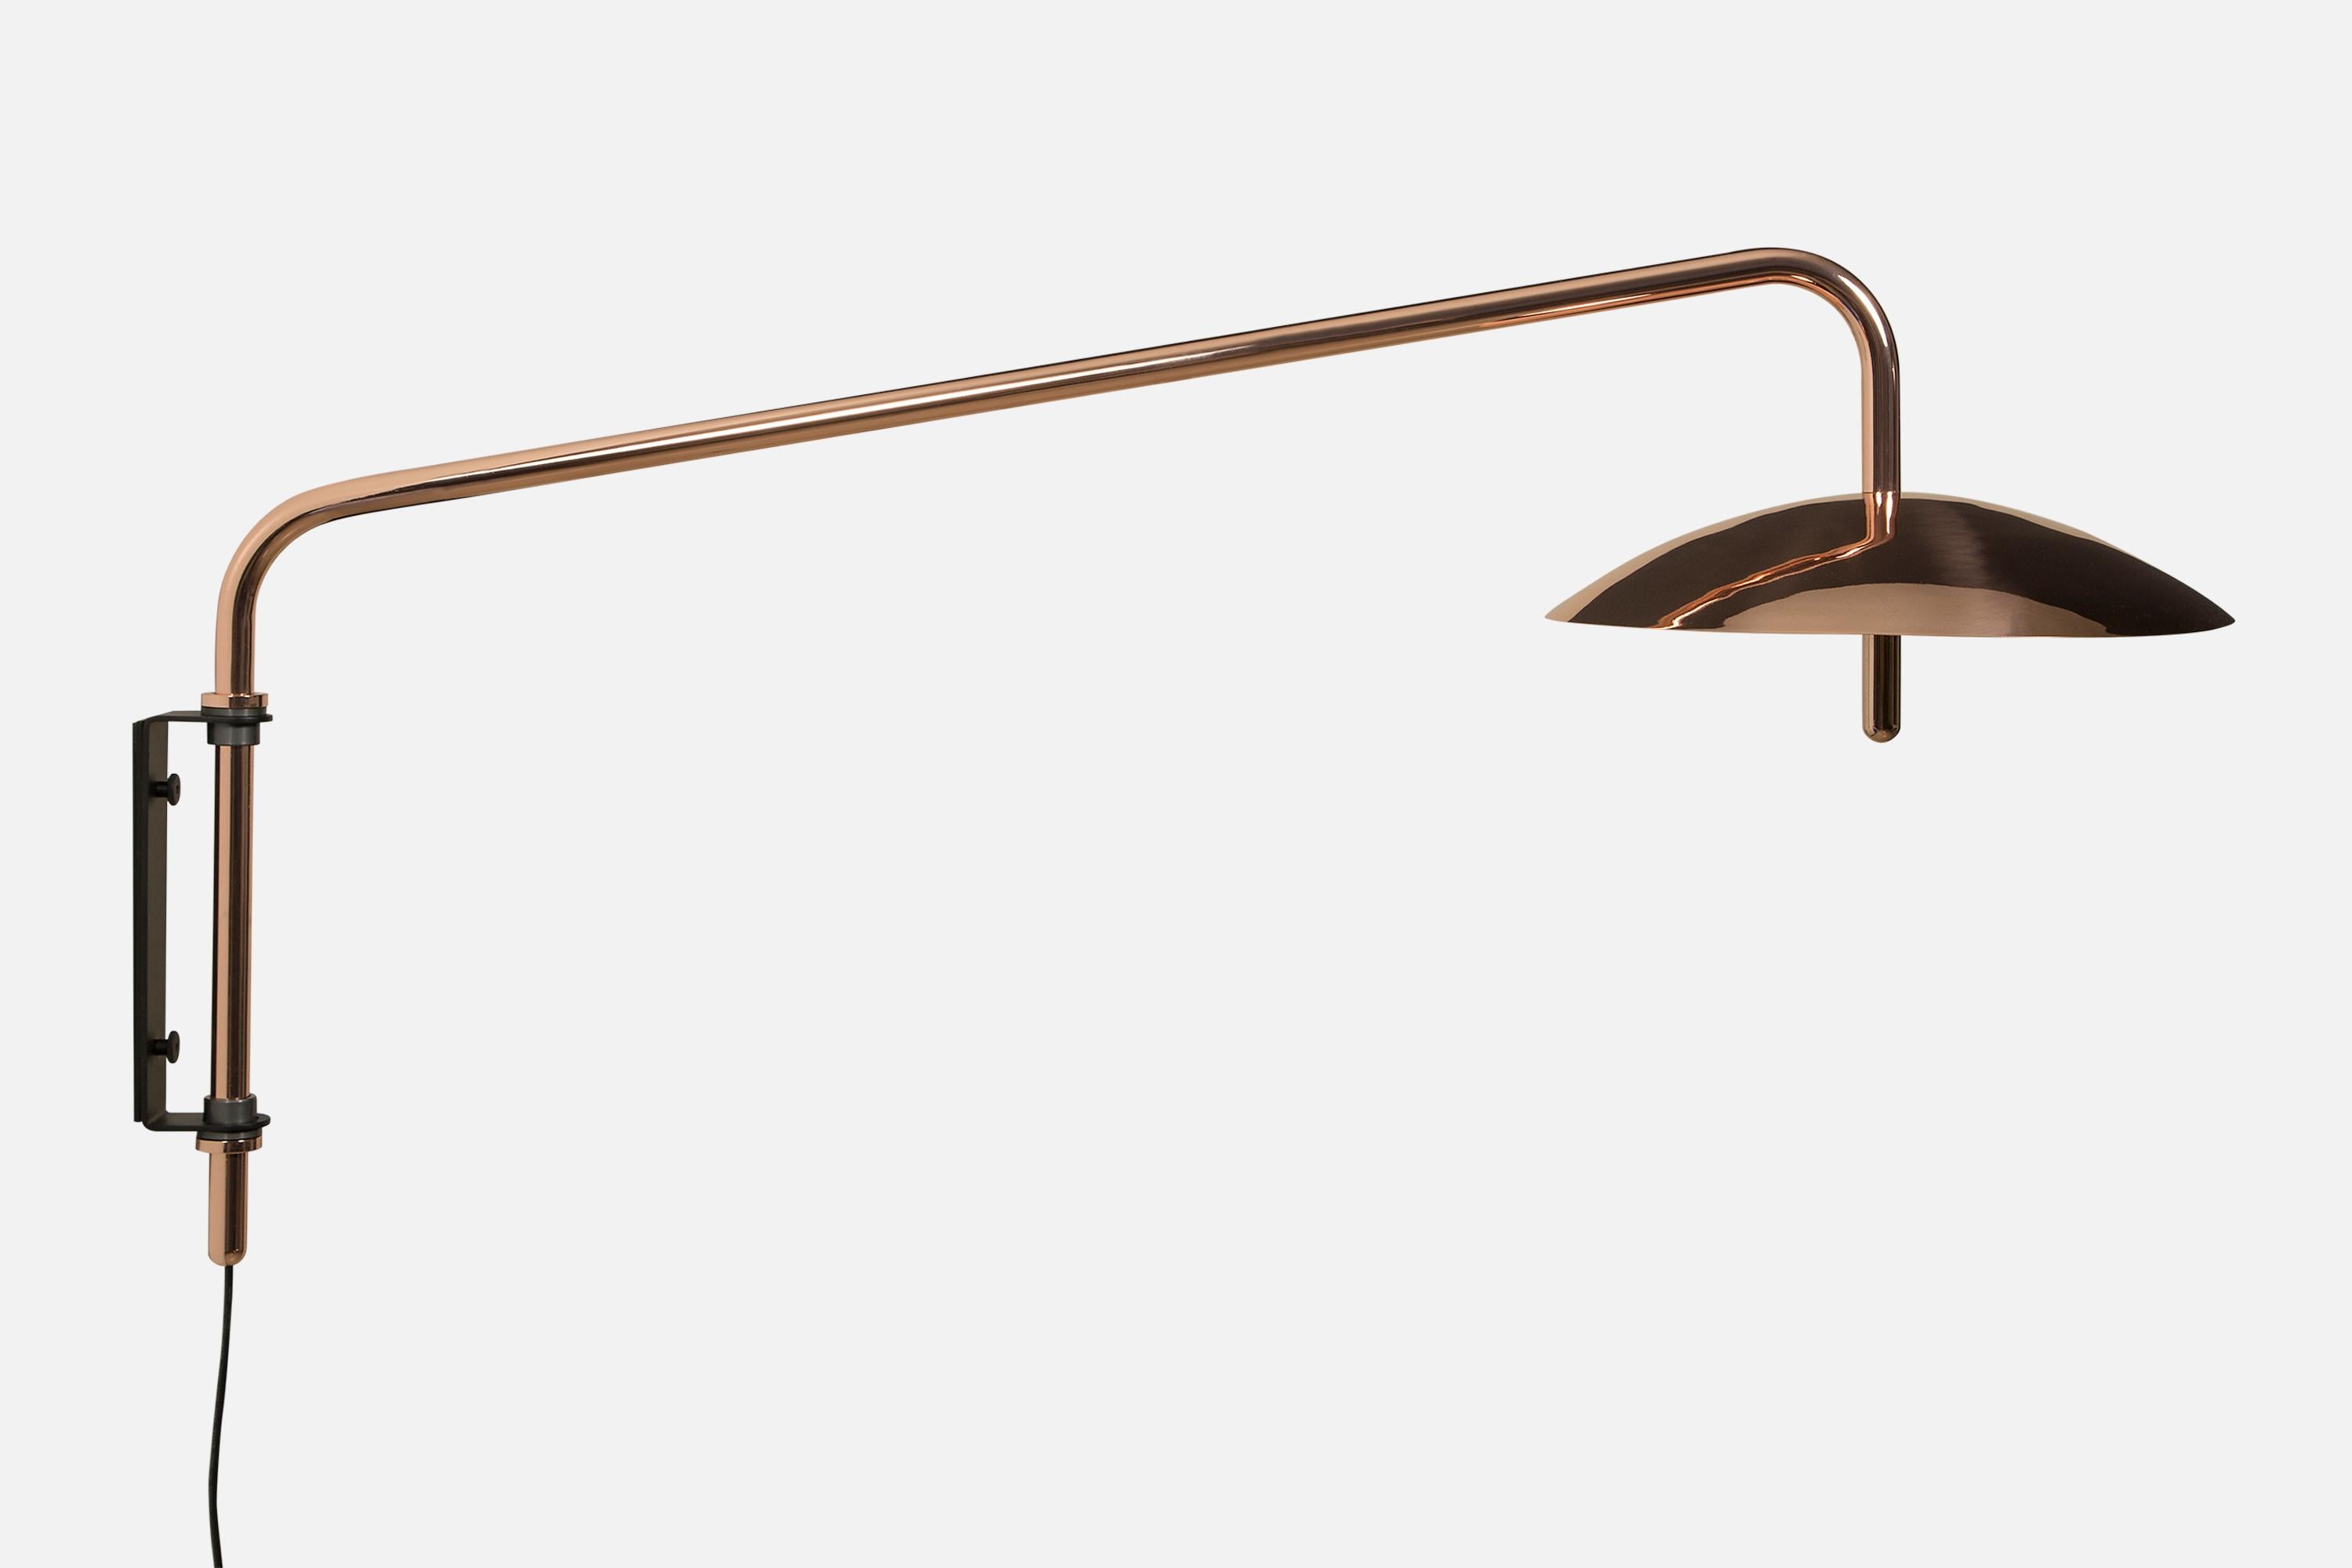 Contemporary Signal Arm Sconce in Black x Brass, Long, by Souda, in Stock